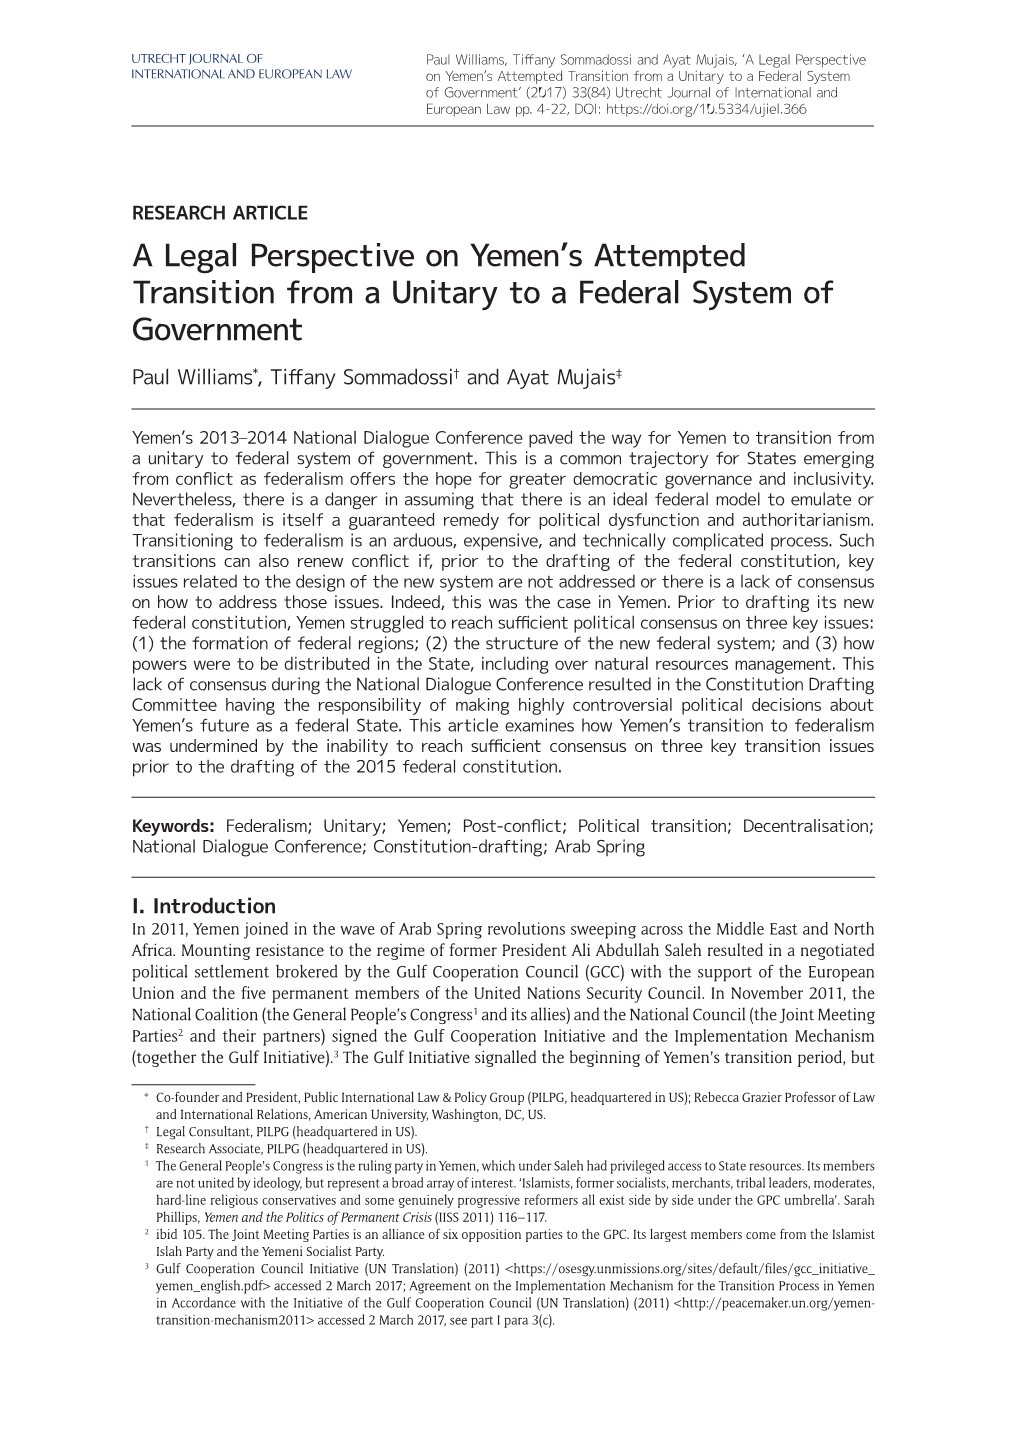 A Legal Perspective on Yemen's Attempted Transition from a Unitary